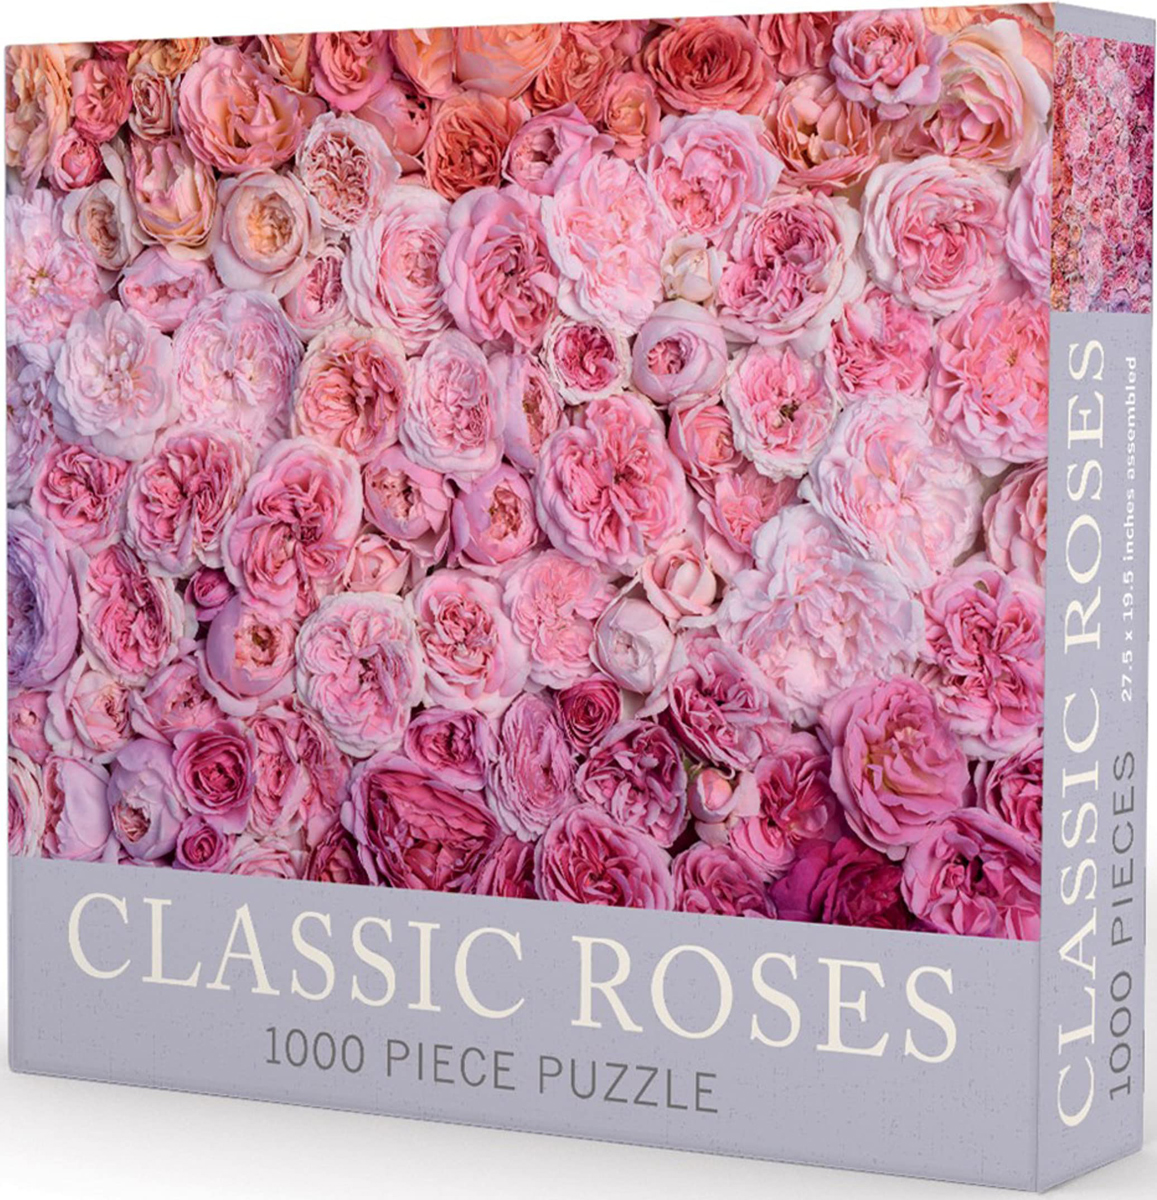 Classic Roses Flower & Garden Jigsaw Puzzle